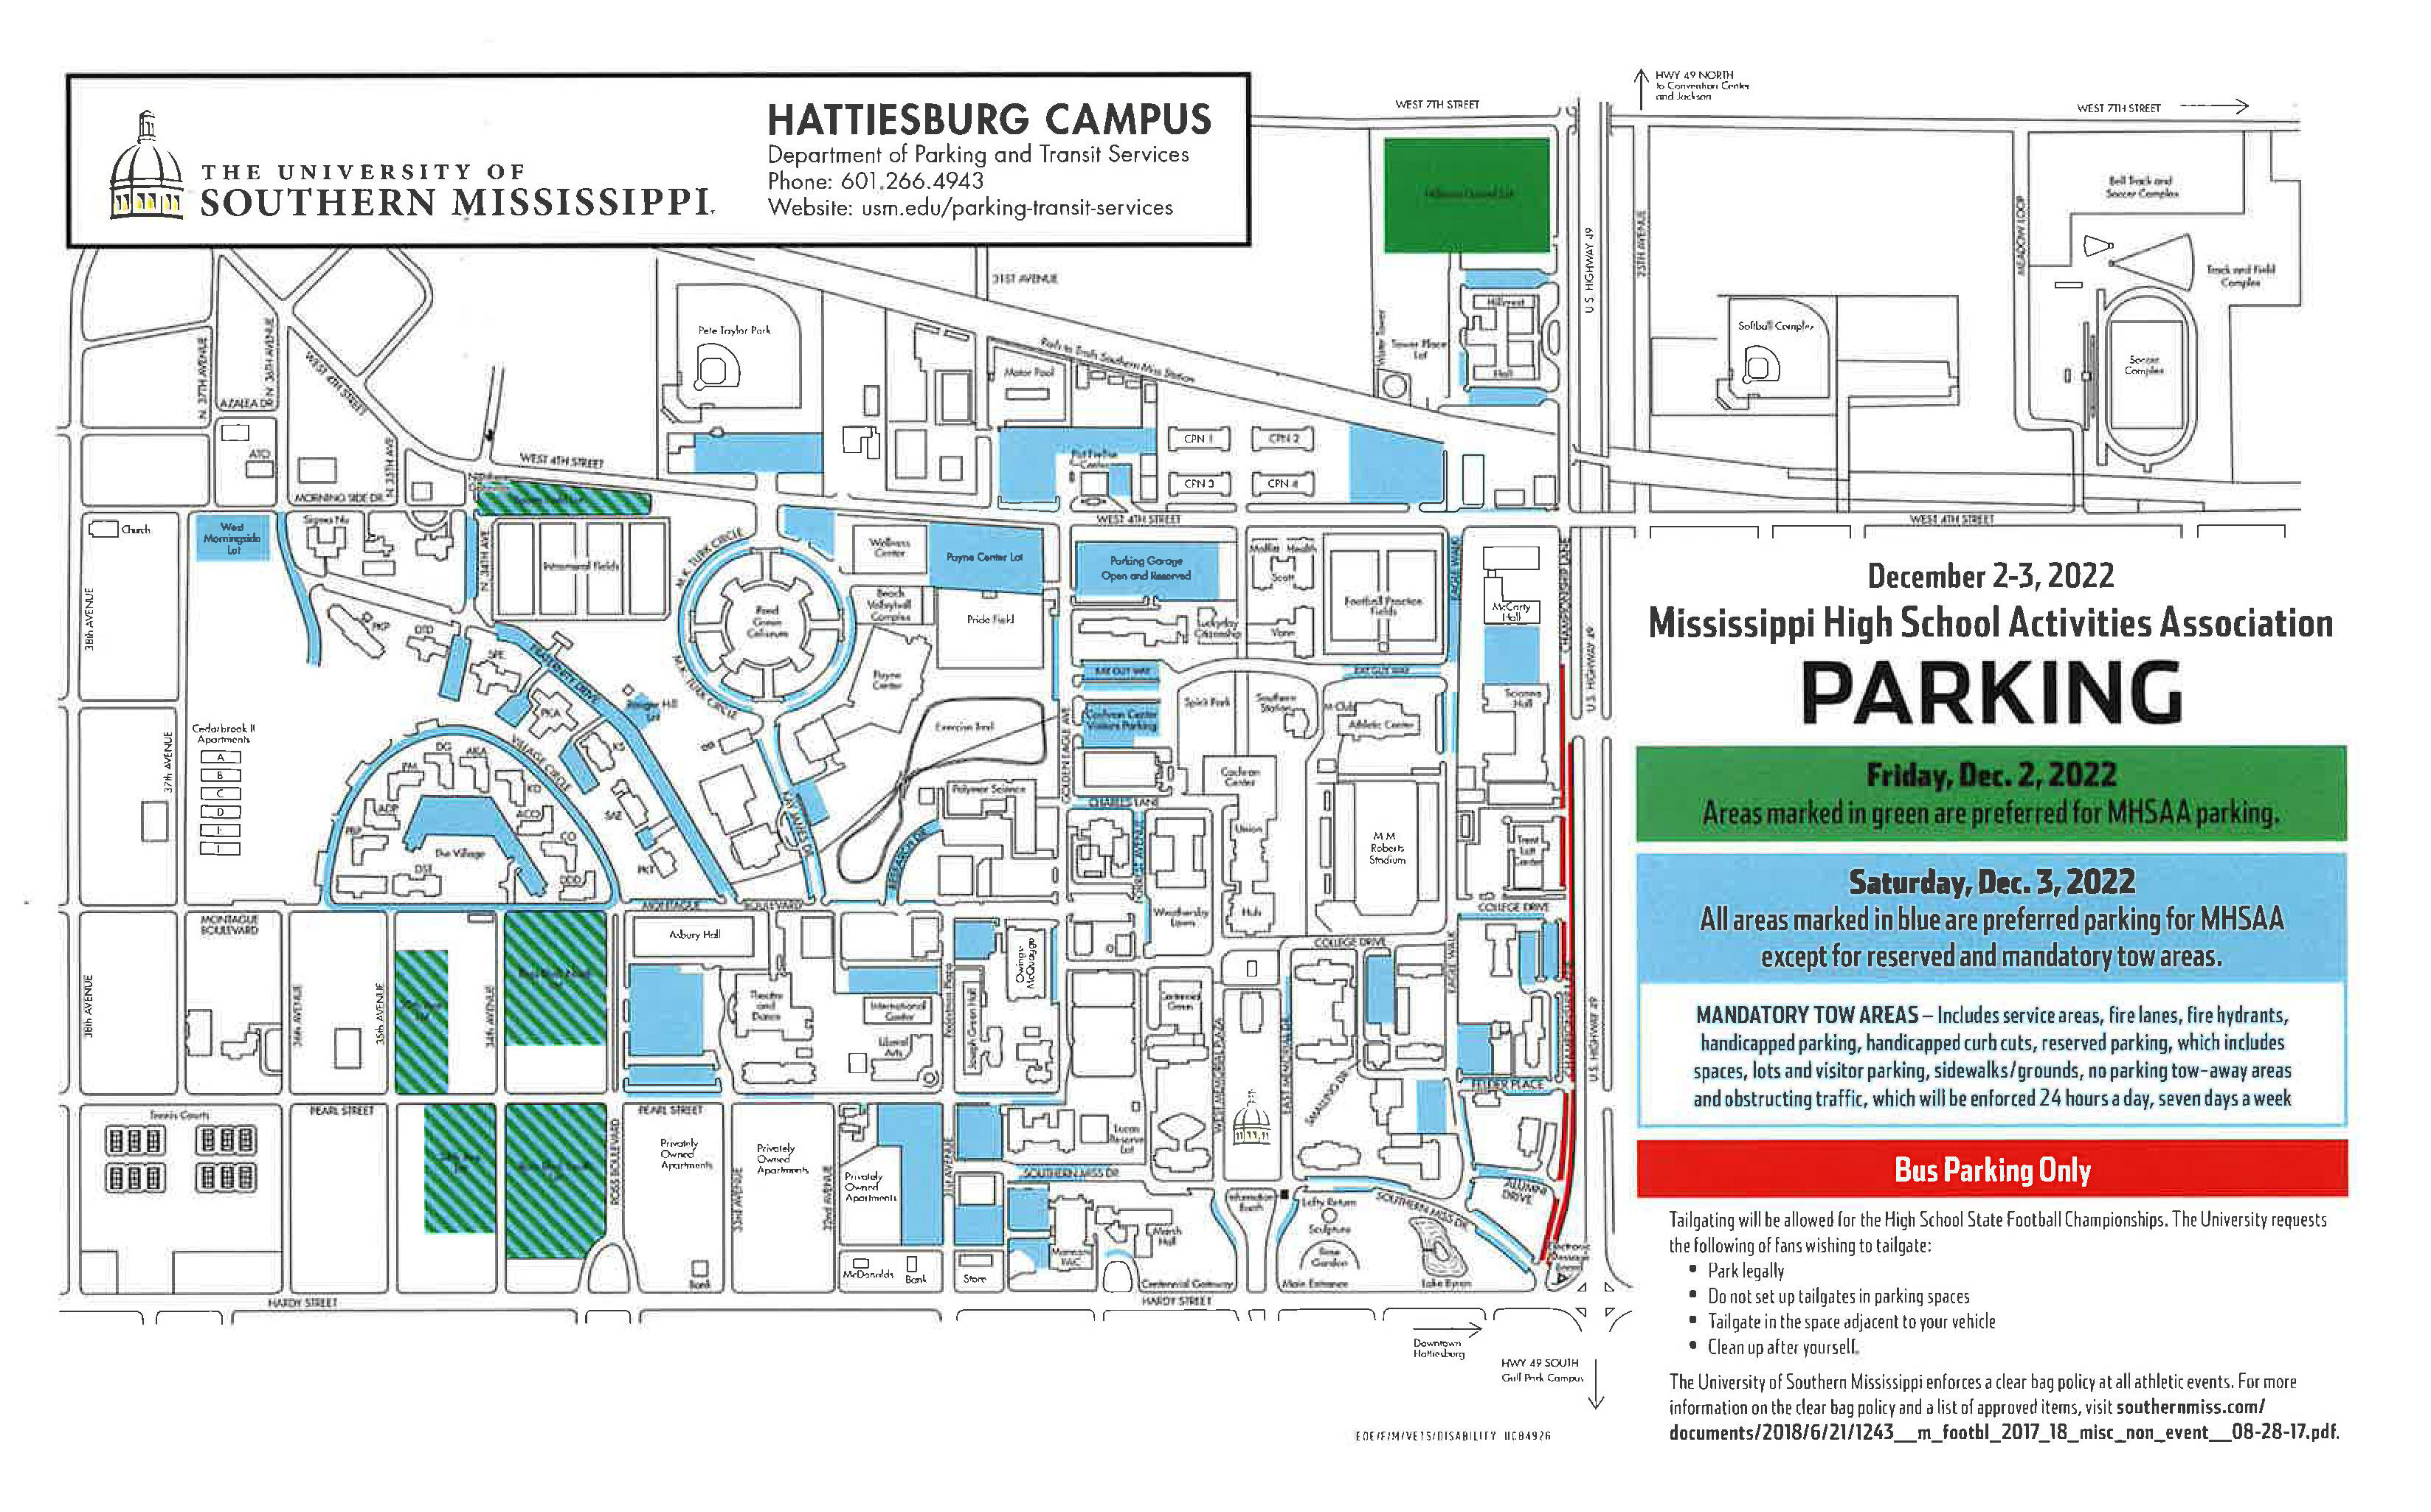 USM parking map for state championship